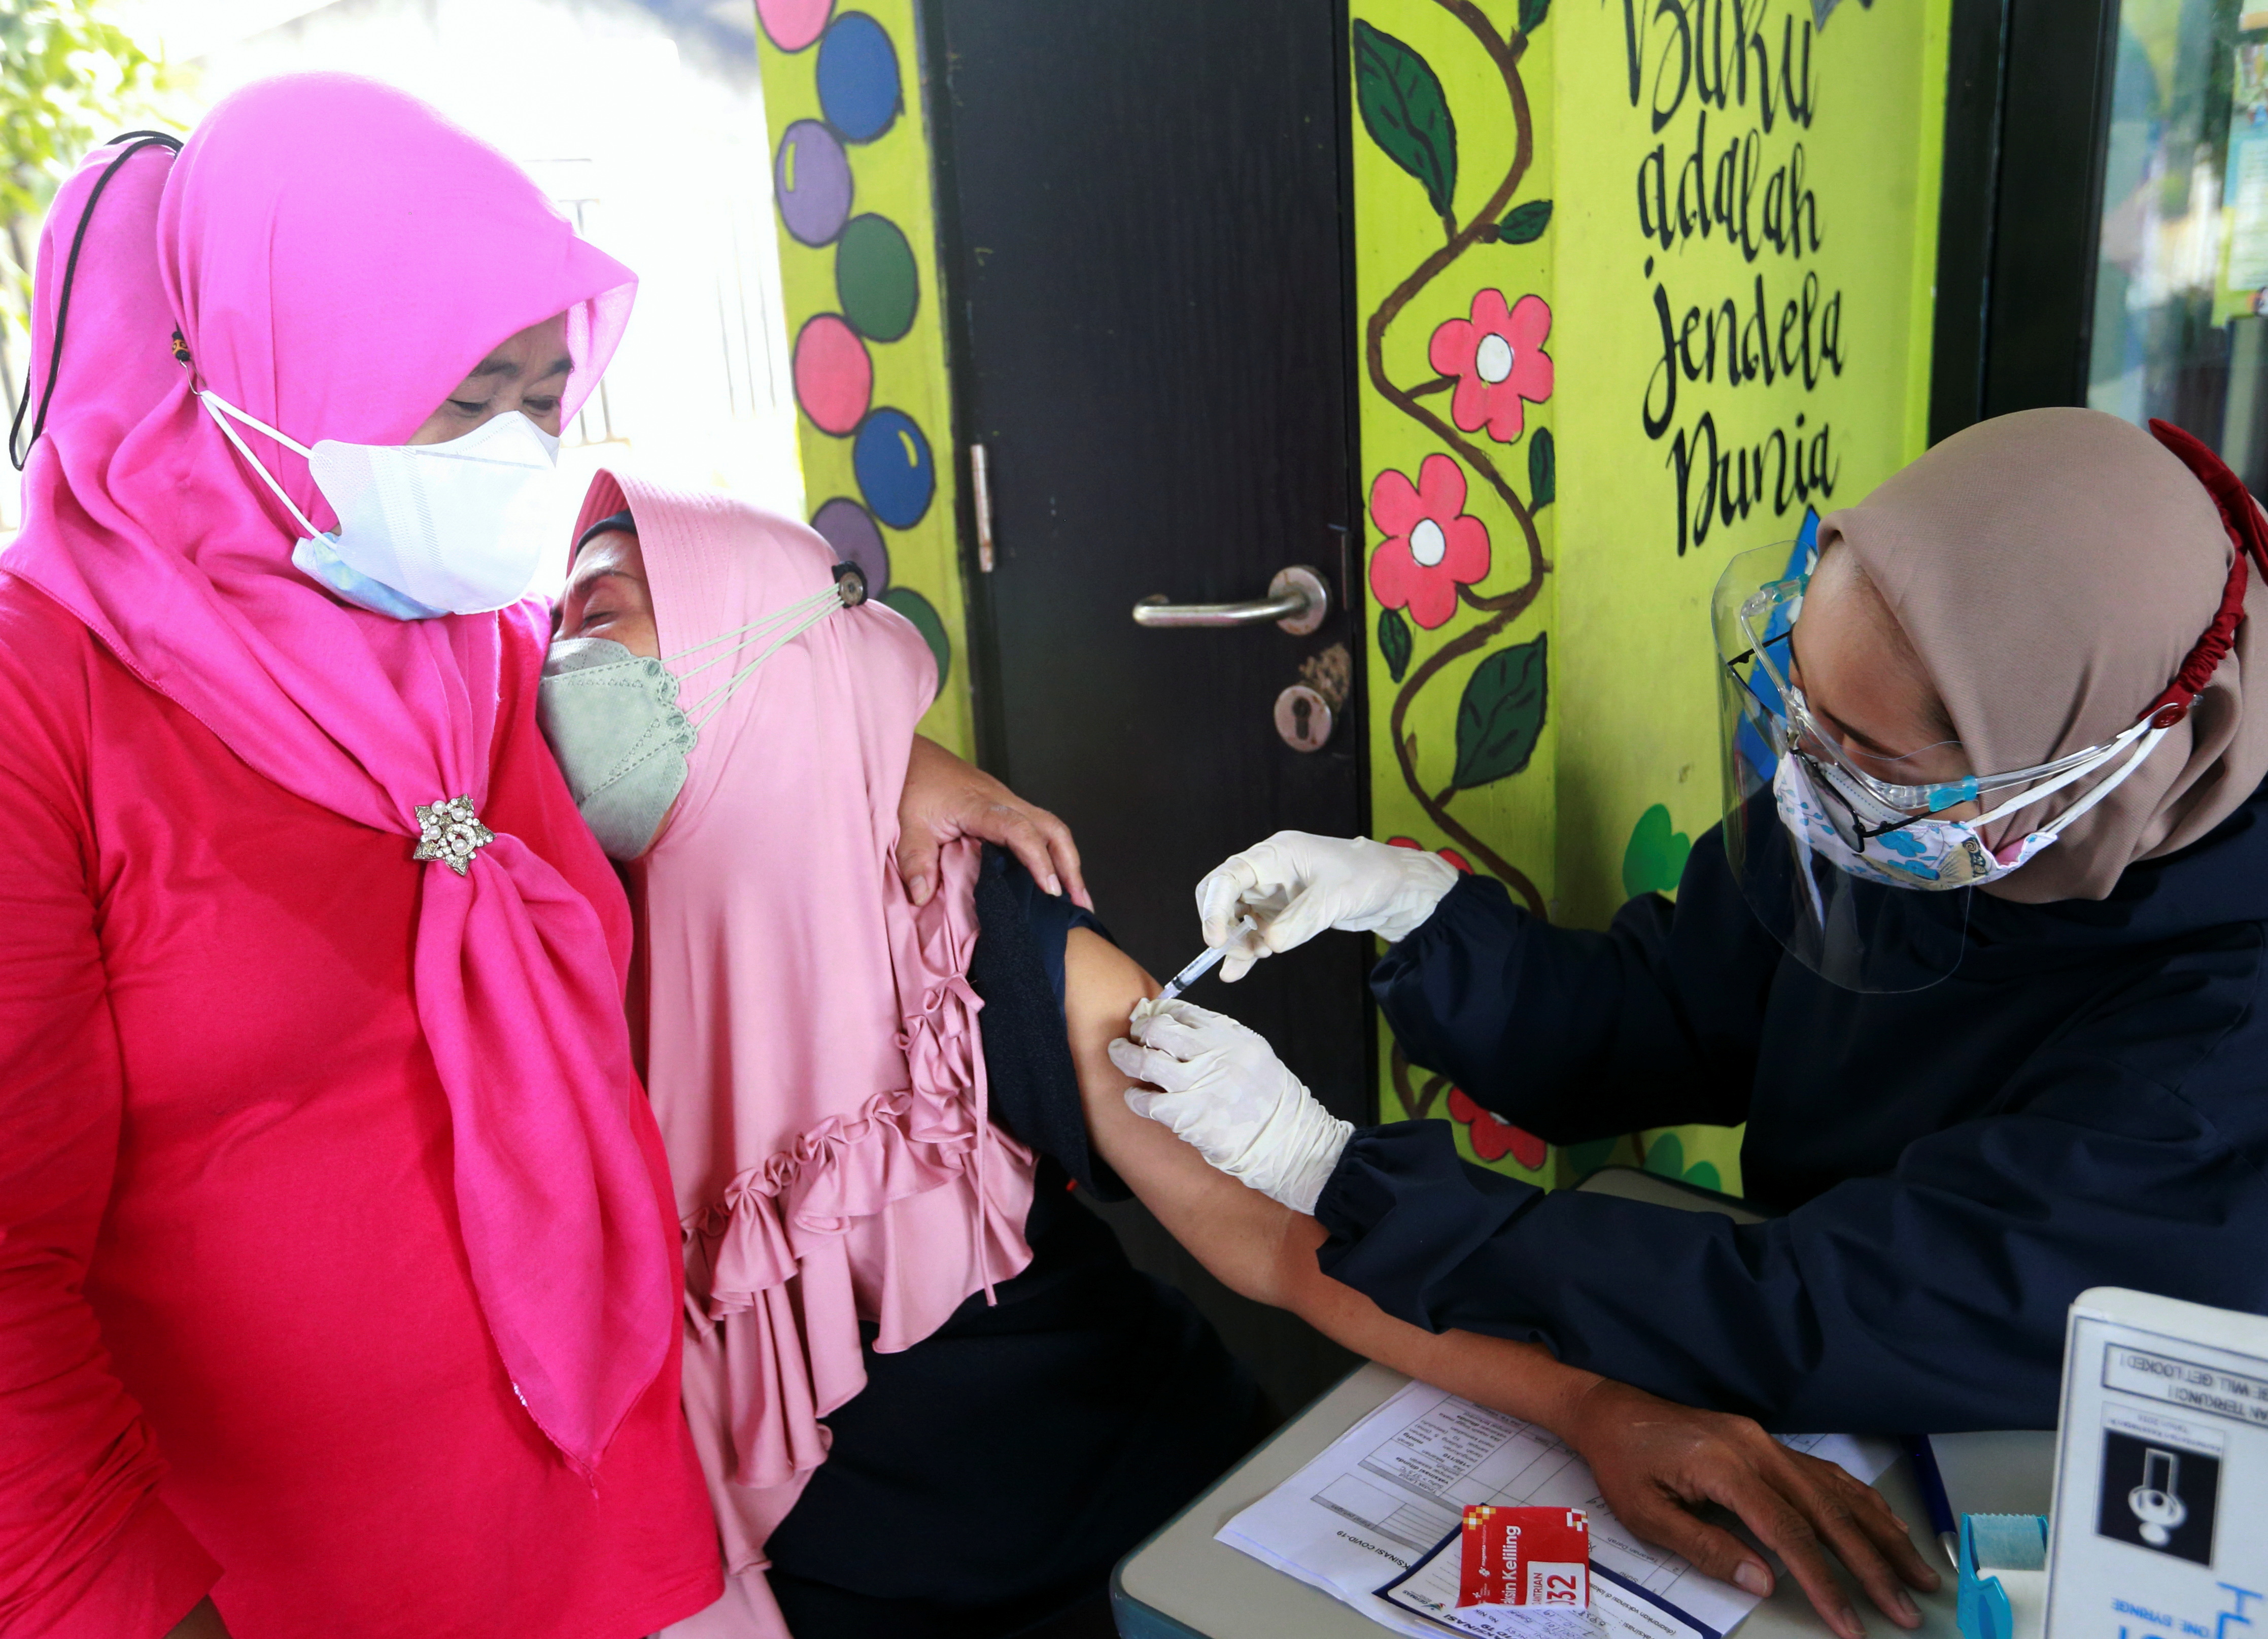 Vaccination rollout against COVID-19 as cases surge in Jakarta